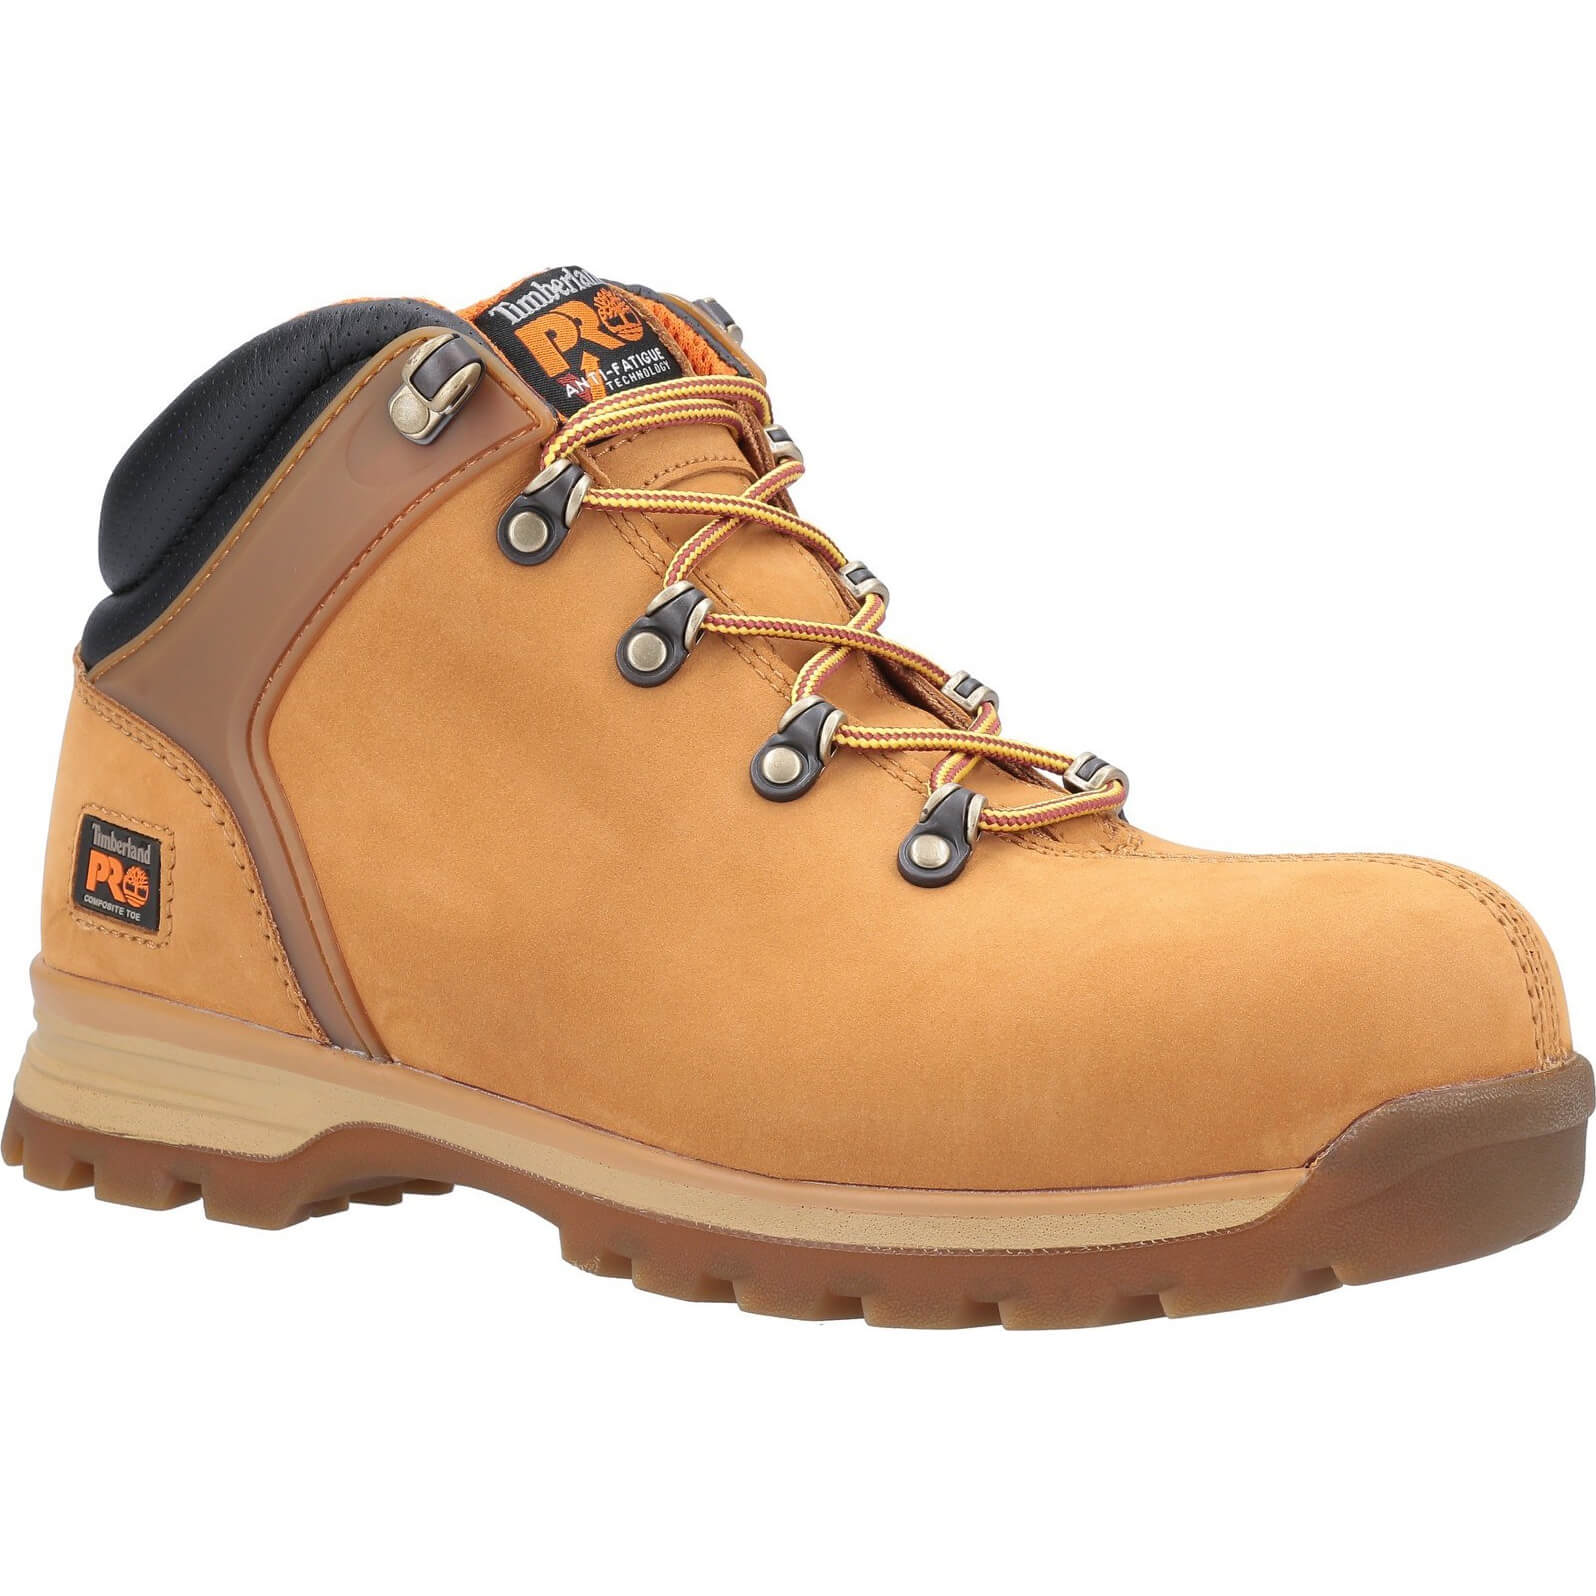 Image of Timberland Pro Splitrock XT Composite Safety Toe Work Boot Wheat Size 6